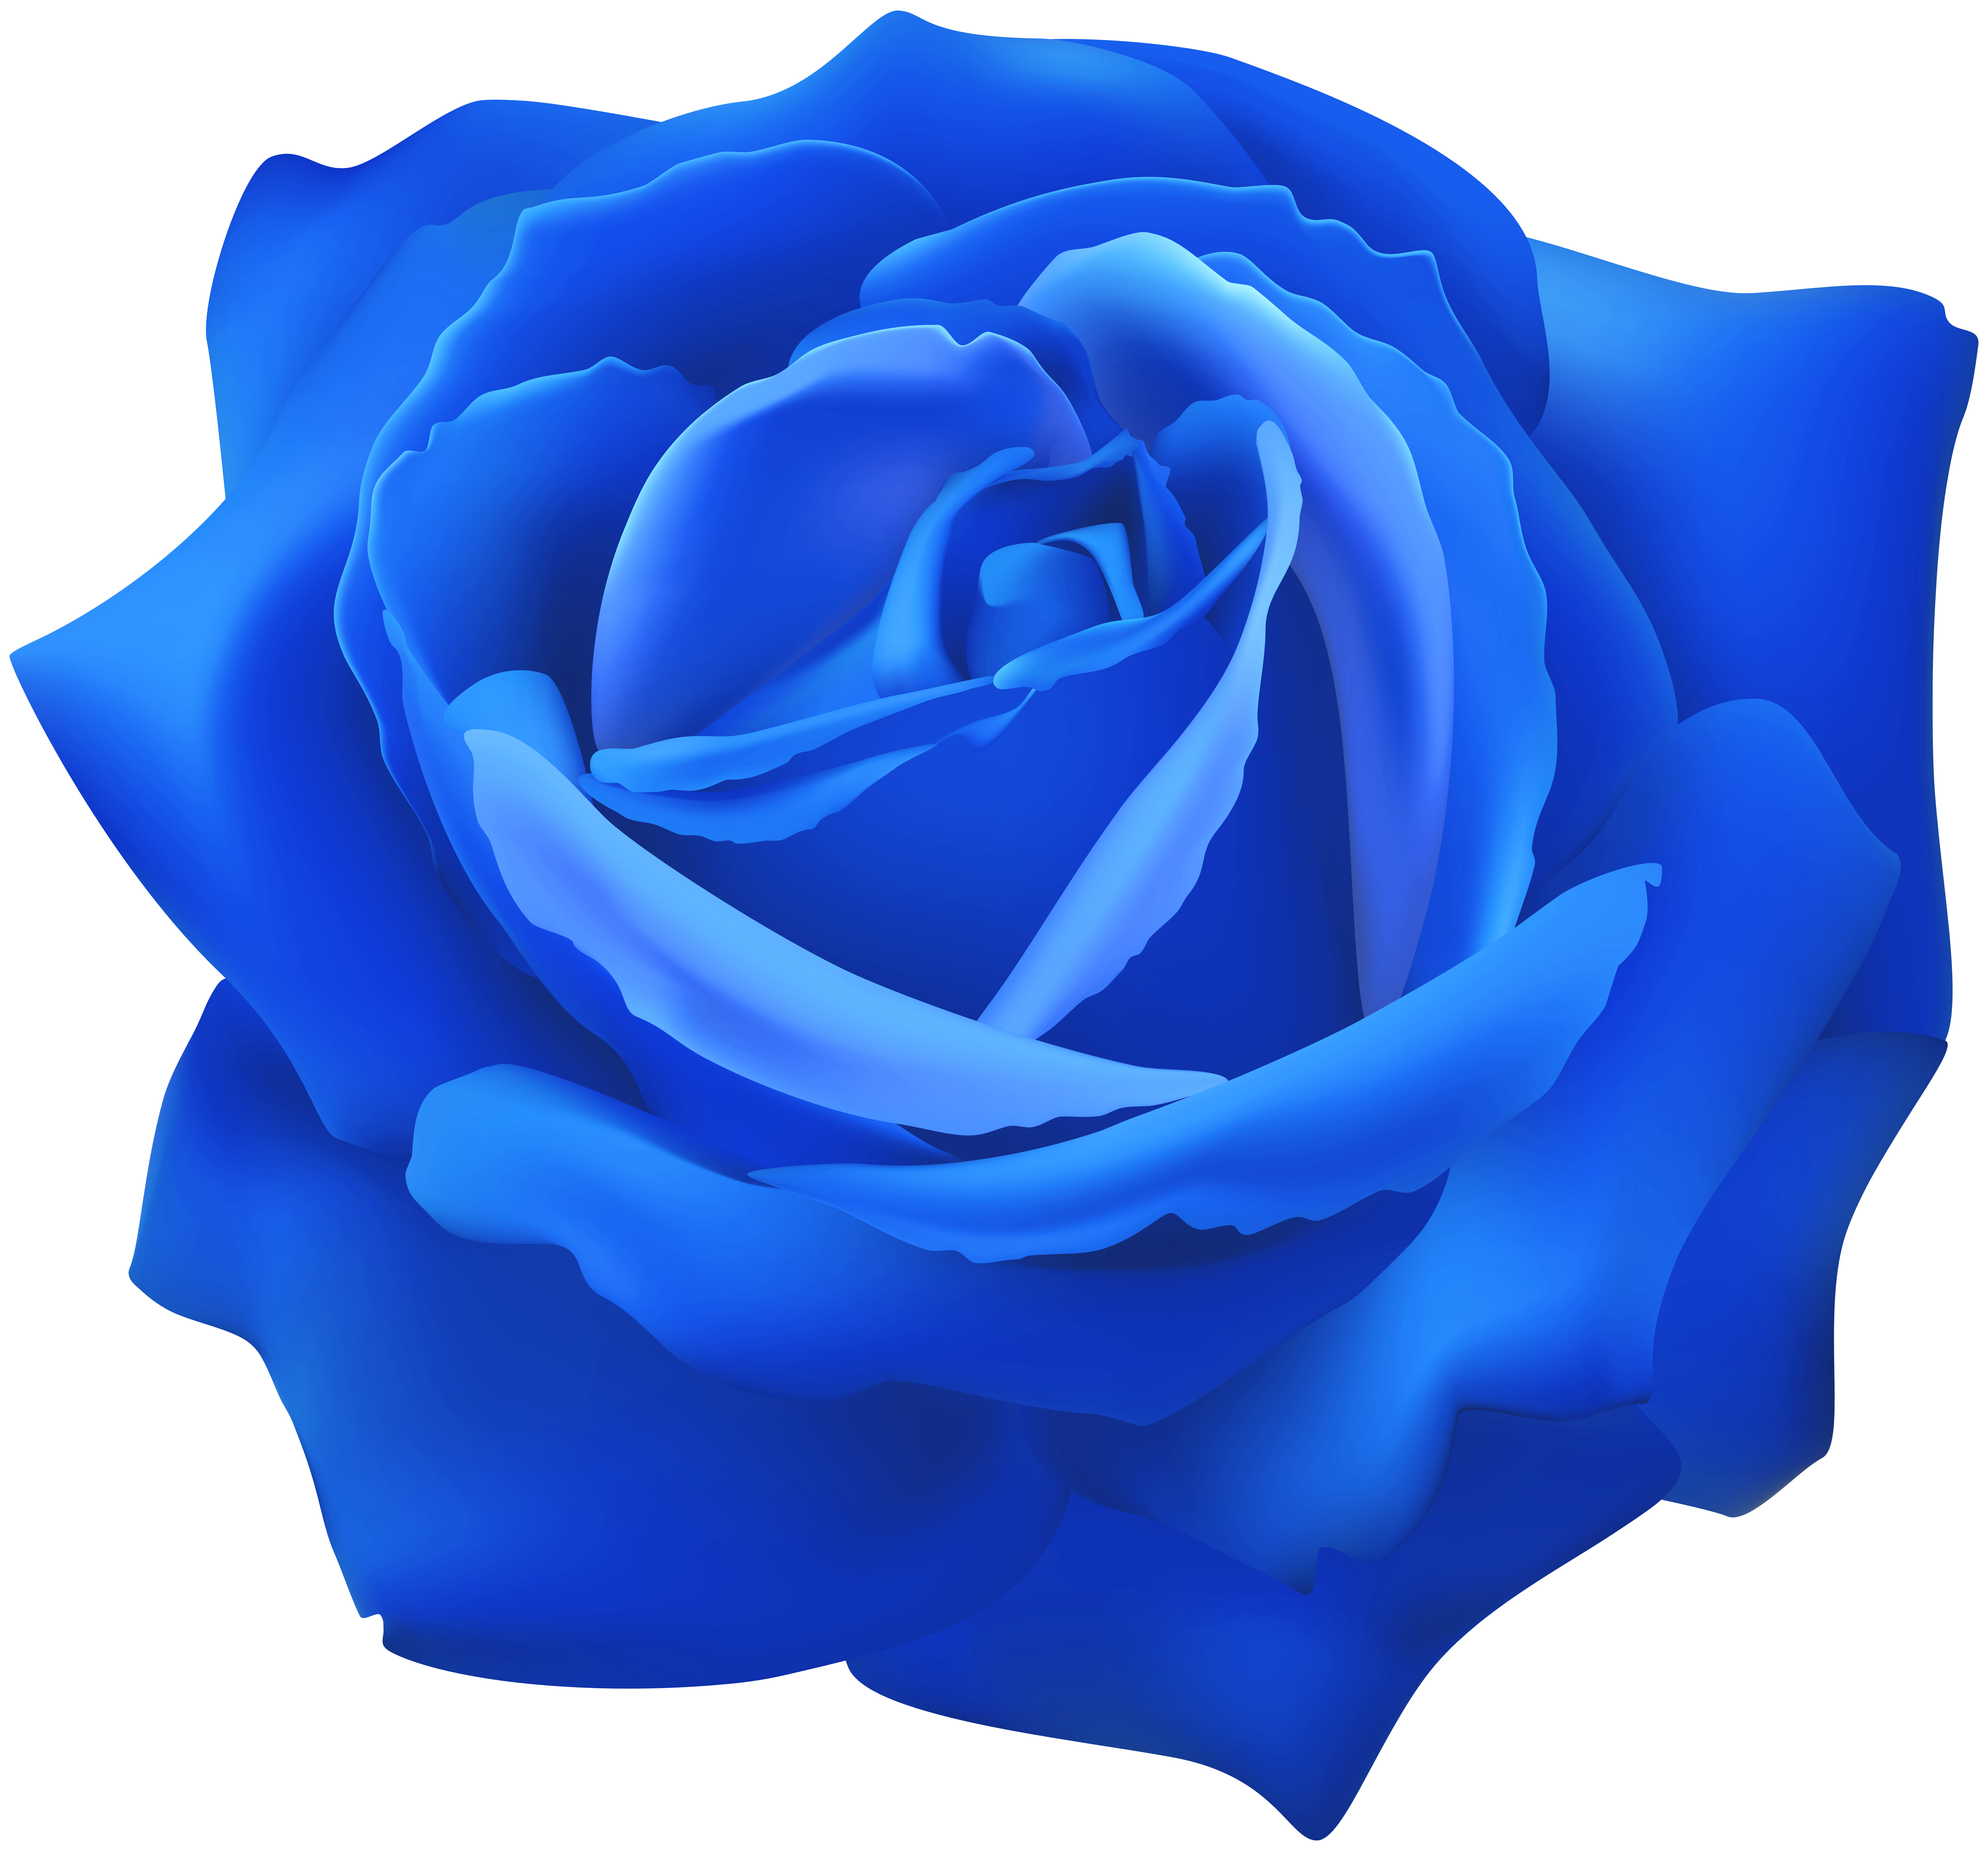 Blue Rose Flower Clip Art Image | Gallery Yopriceville - High-Quality